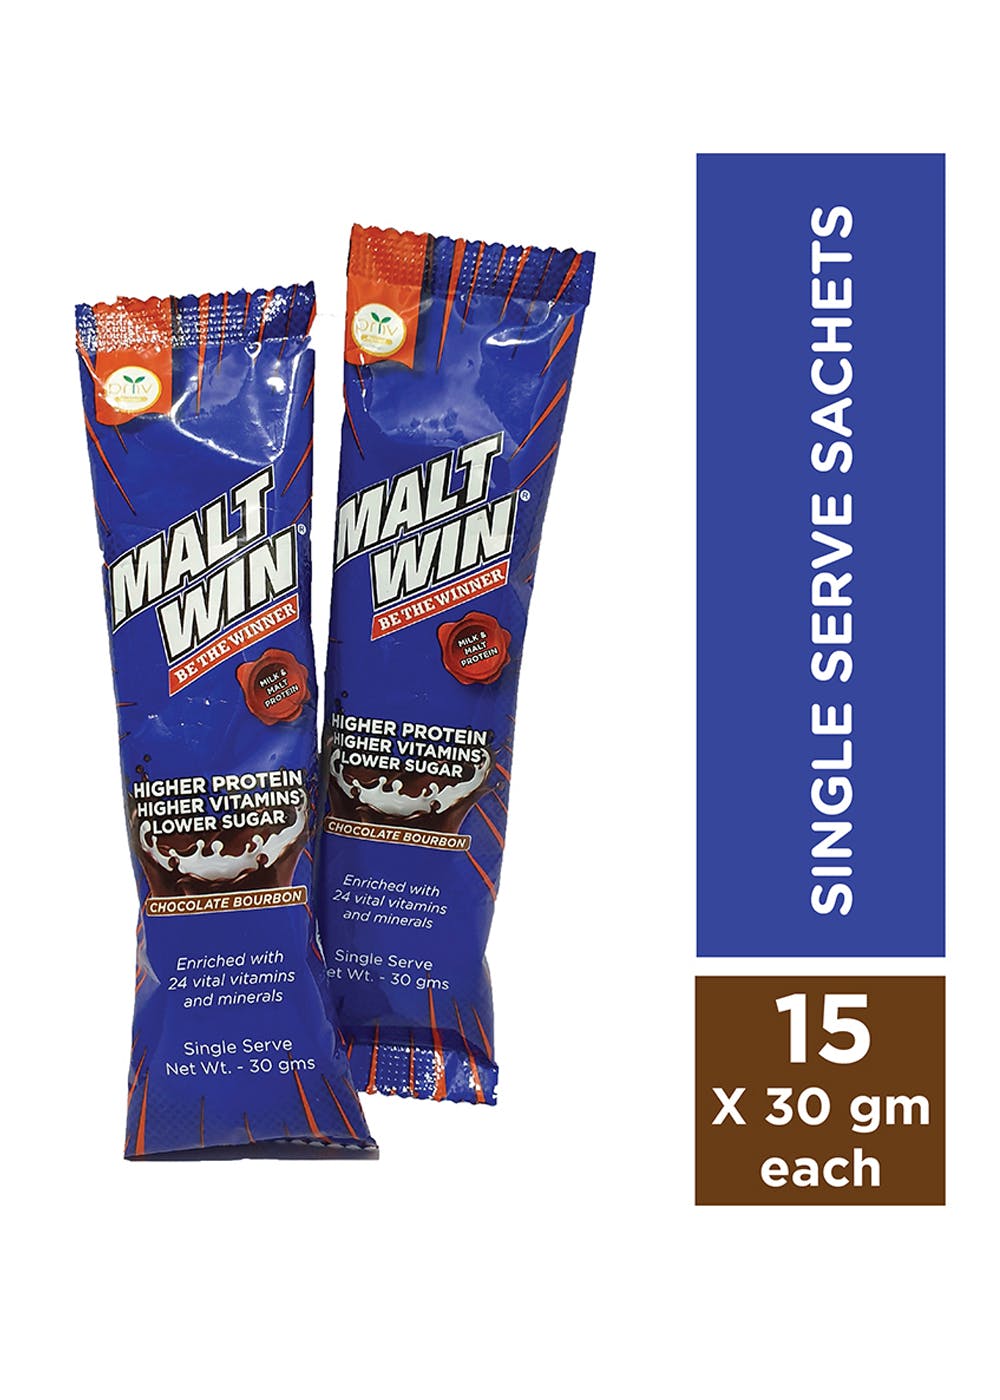 Chocolate Bourbon Single Serve Pack - Pack of 15 (30g Each)